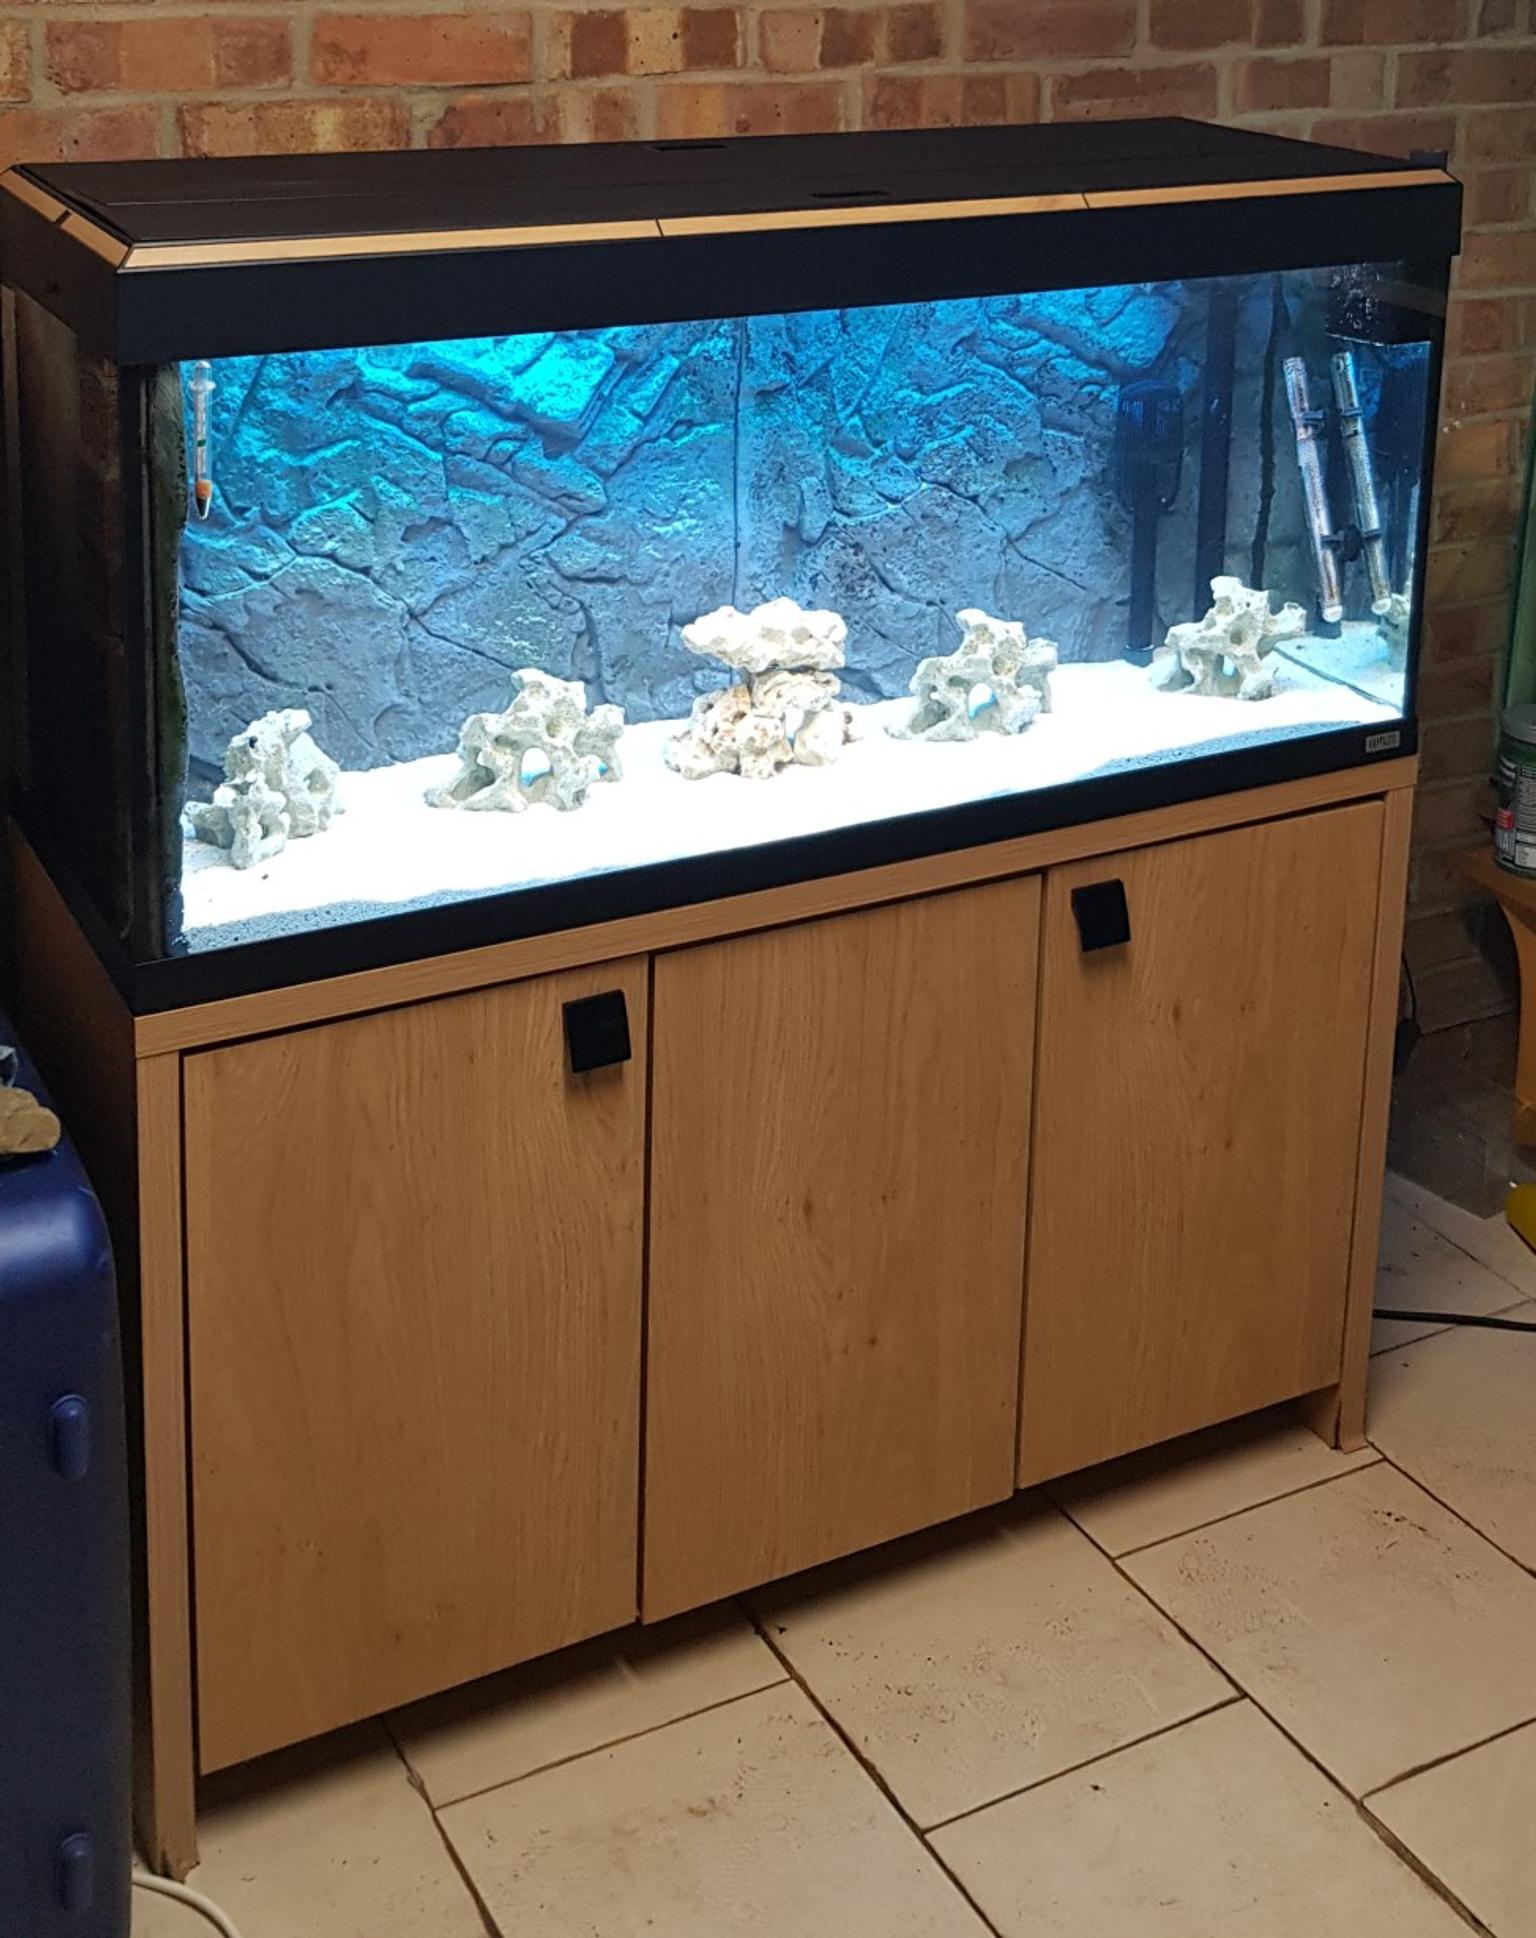 Fx6 Filter With Fluval Roma 240 Fish Tank In Sw17 London Borough